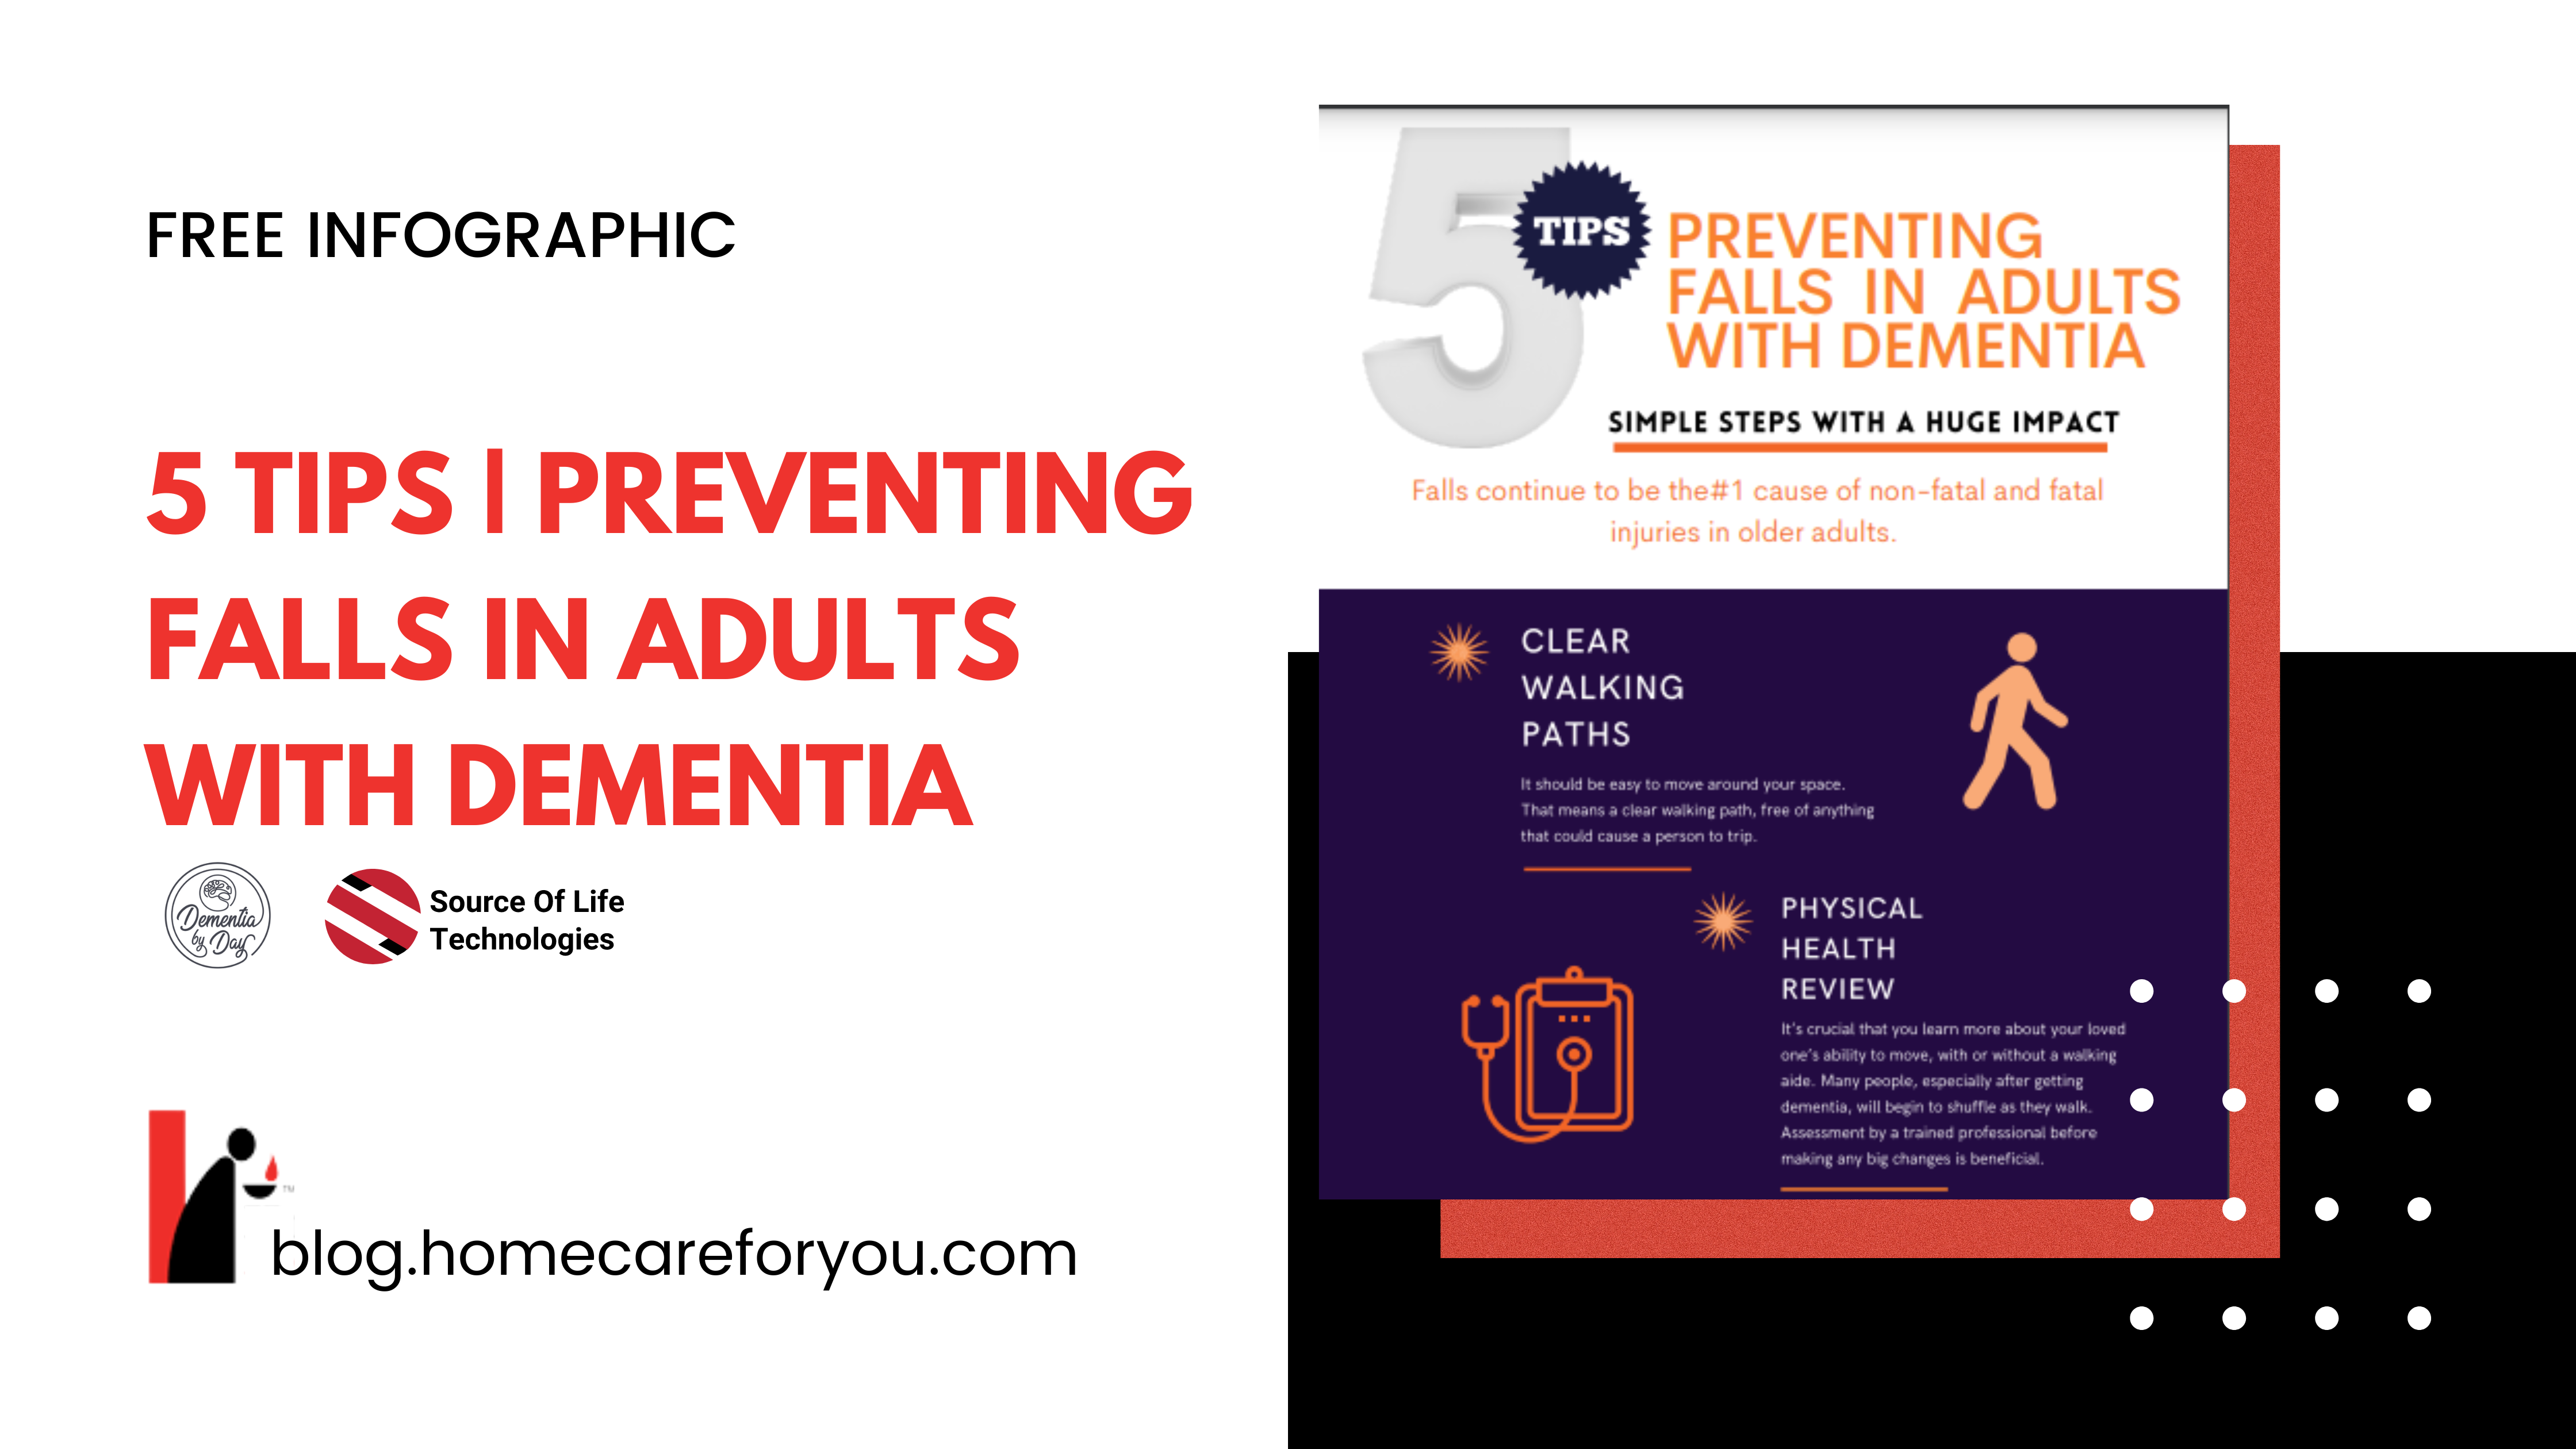 5 Tips | Preventing Falls in Adults with Dementia